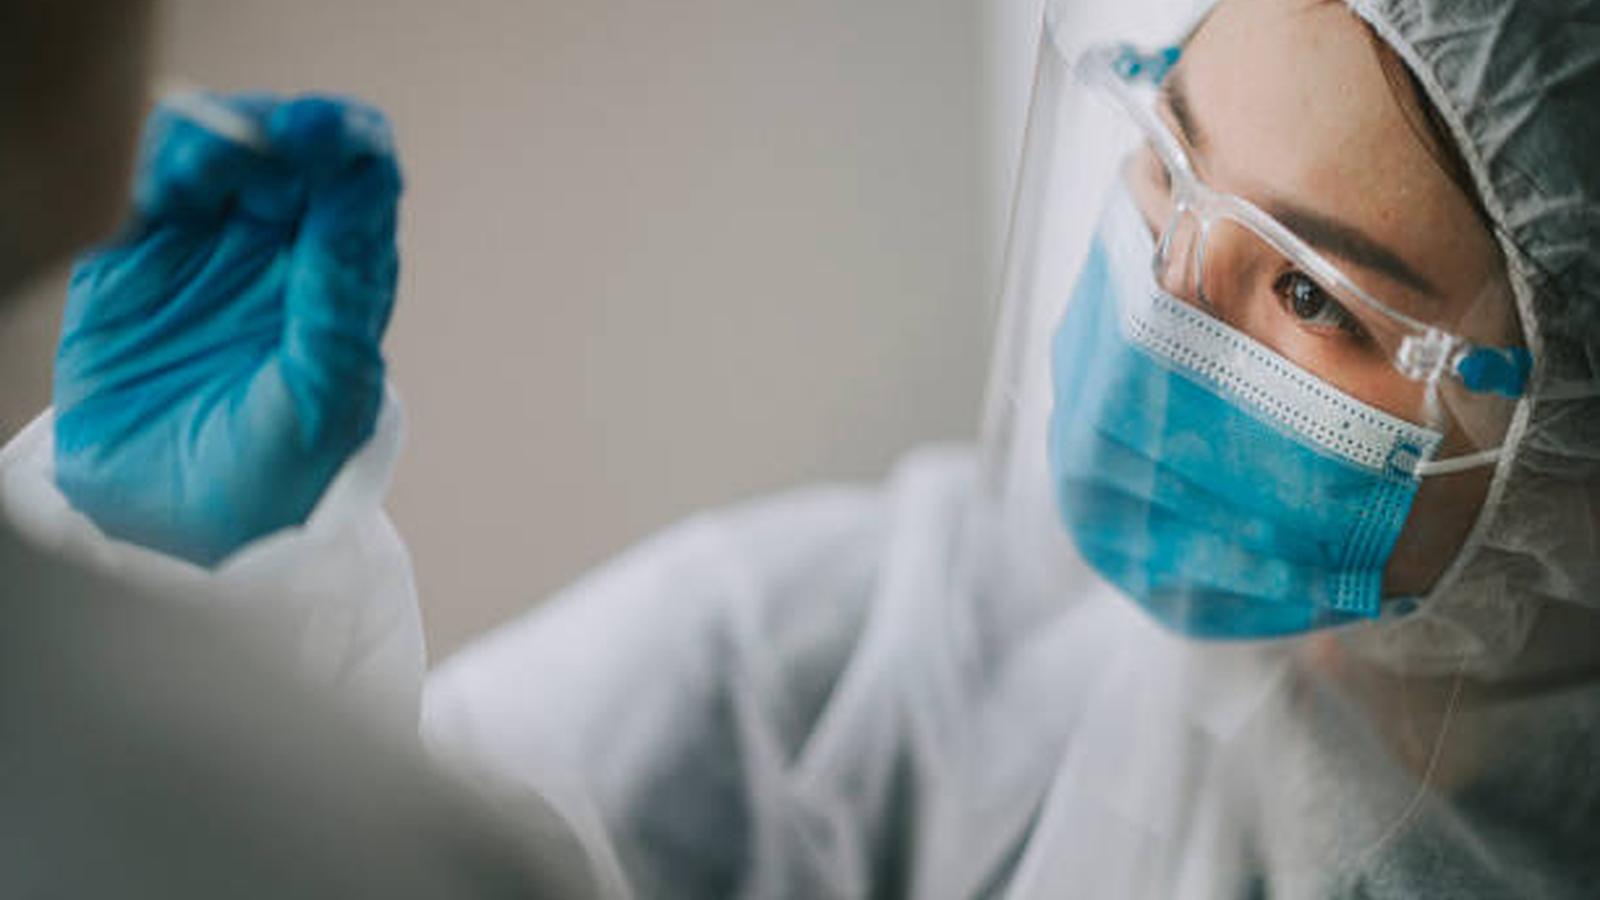 Surgical Gowns: Ensuring Safety in the Operating Room